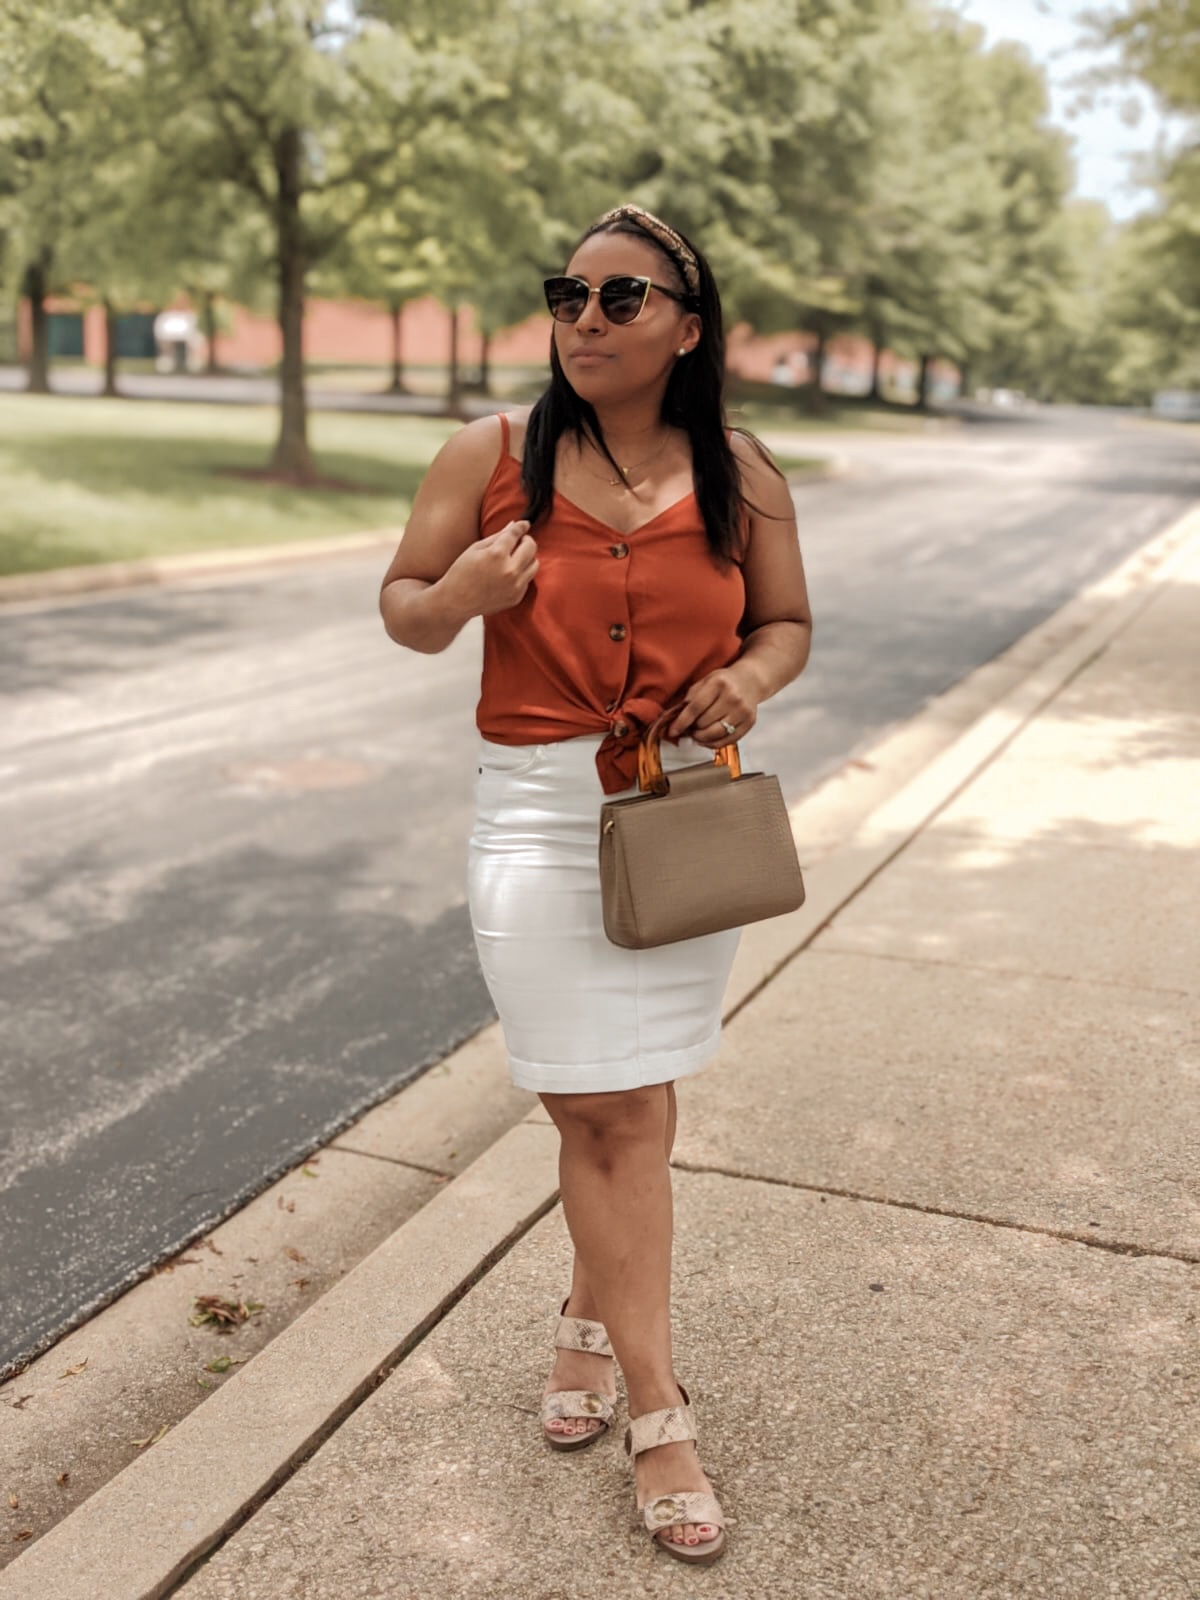 dress lily, pattys kloset, summer outfit ideas, how to style a white skirt, summer cami, how to style a cami tank